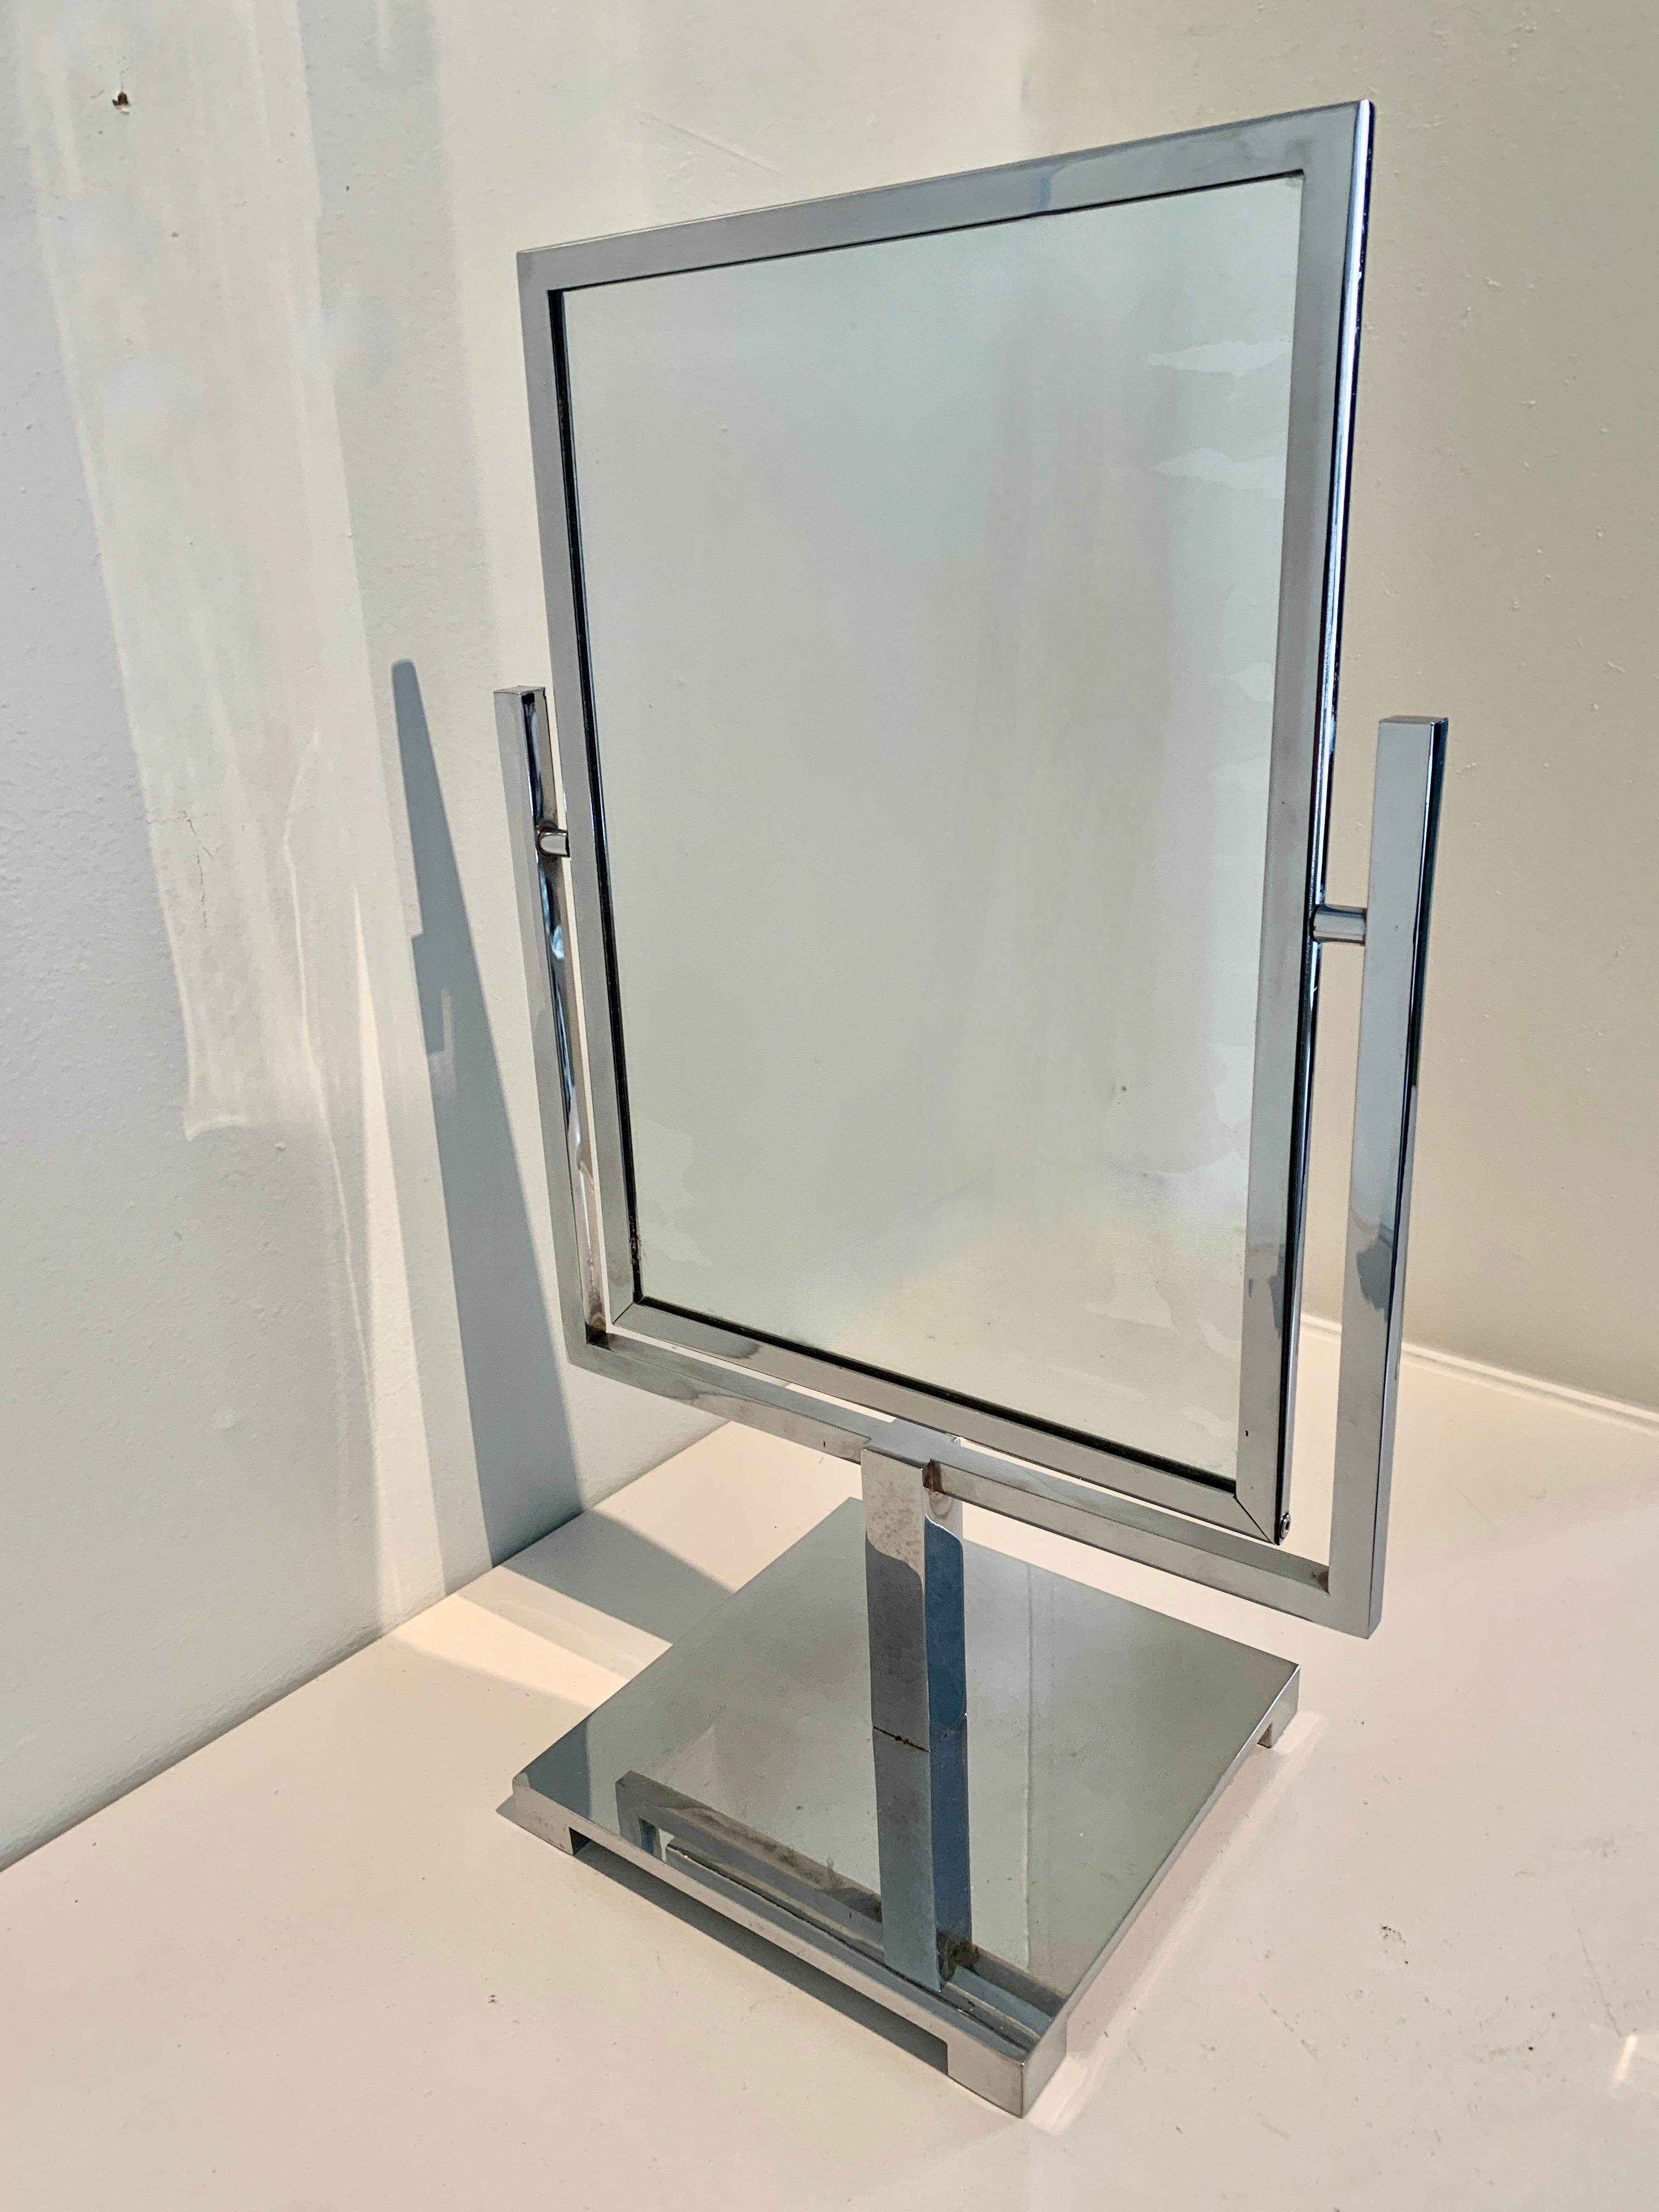 A Wonderful Architectural mirror. The Mirror is double sided with normal reflection (not Magnifying) on both sides. The mirror is encased in a polished chrome frame on a stand of the same material - four small feet.